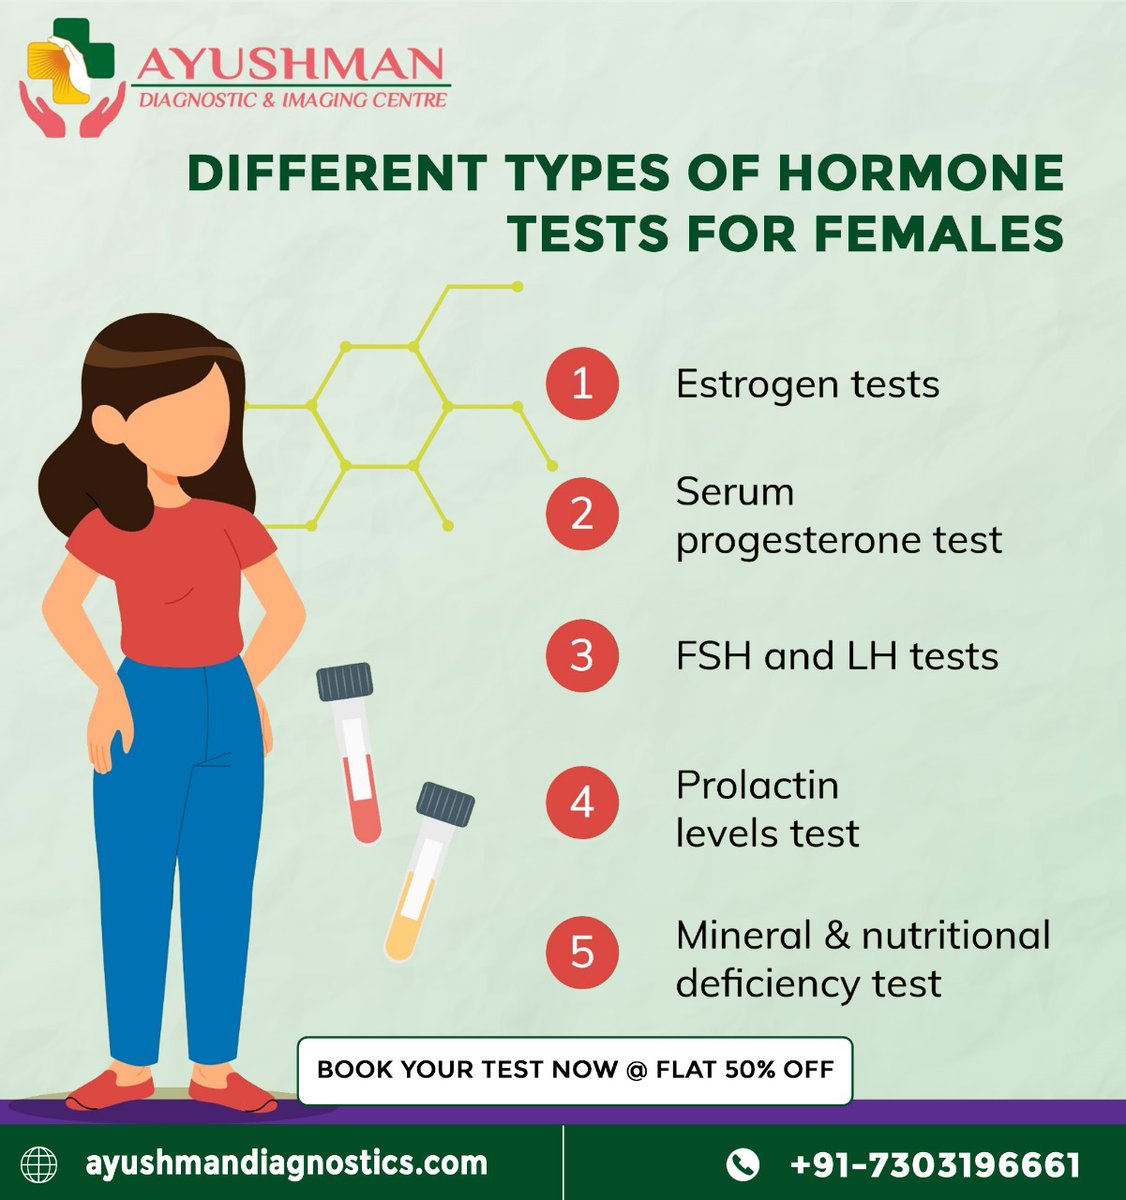 Hormonal imbalances can cause fatigue, weight swings, and mood changes.

Get a clear picture of your health. Book your hormone level test today!
.
.
Visit: ayushmandiagnostics.com

#hormoneimbalance #hormones #imbalance #hormonehealth #hormonebalance #hormonalhealth #diagnostic